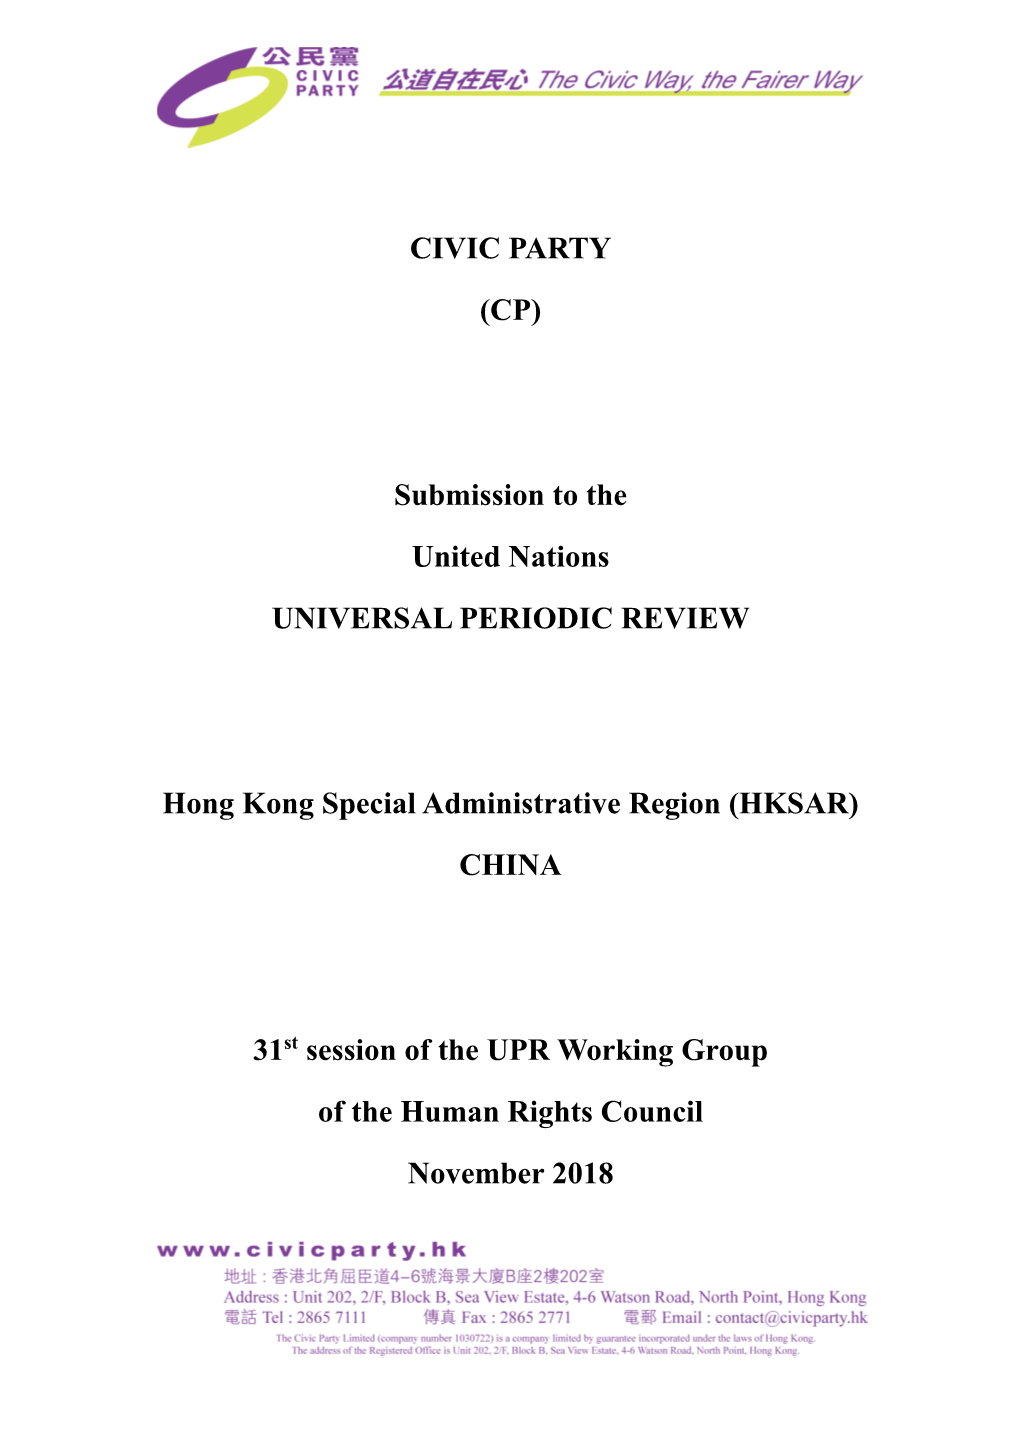 Submission to the United Nations UNIVERSAL PERIODIC REVIEW